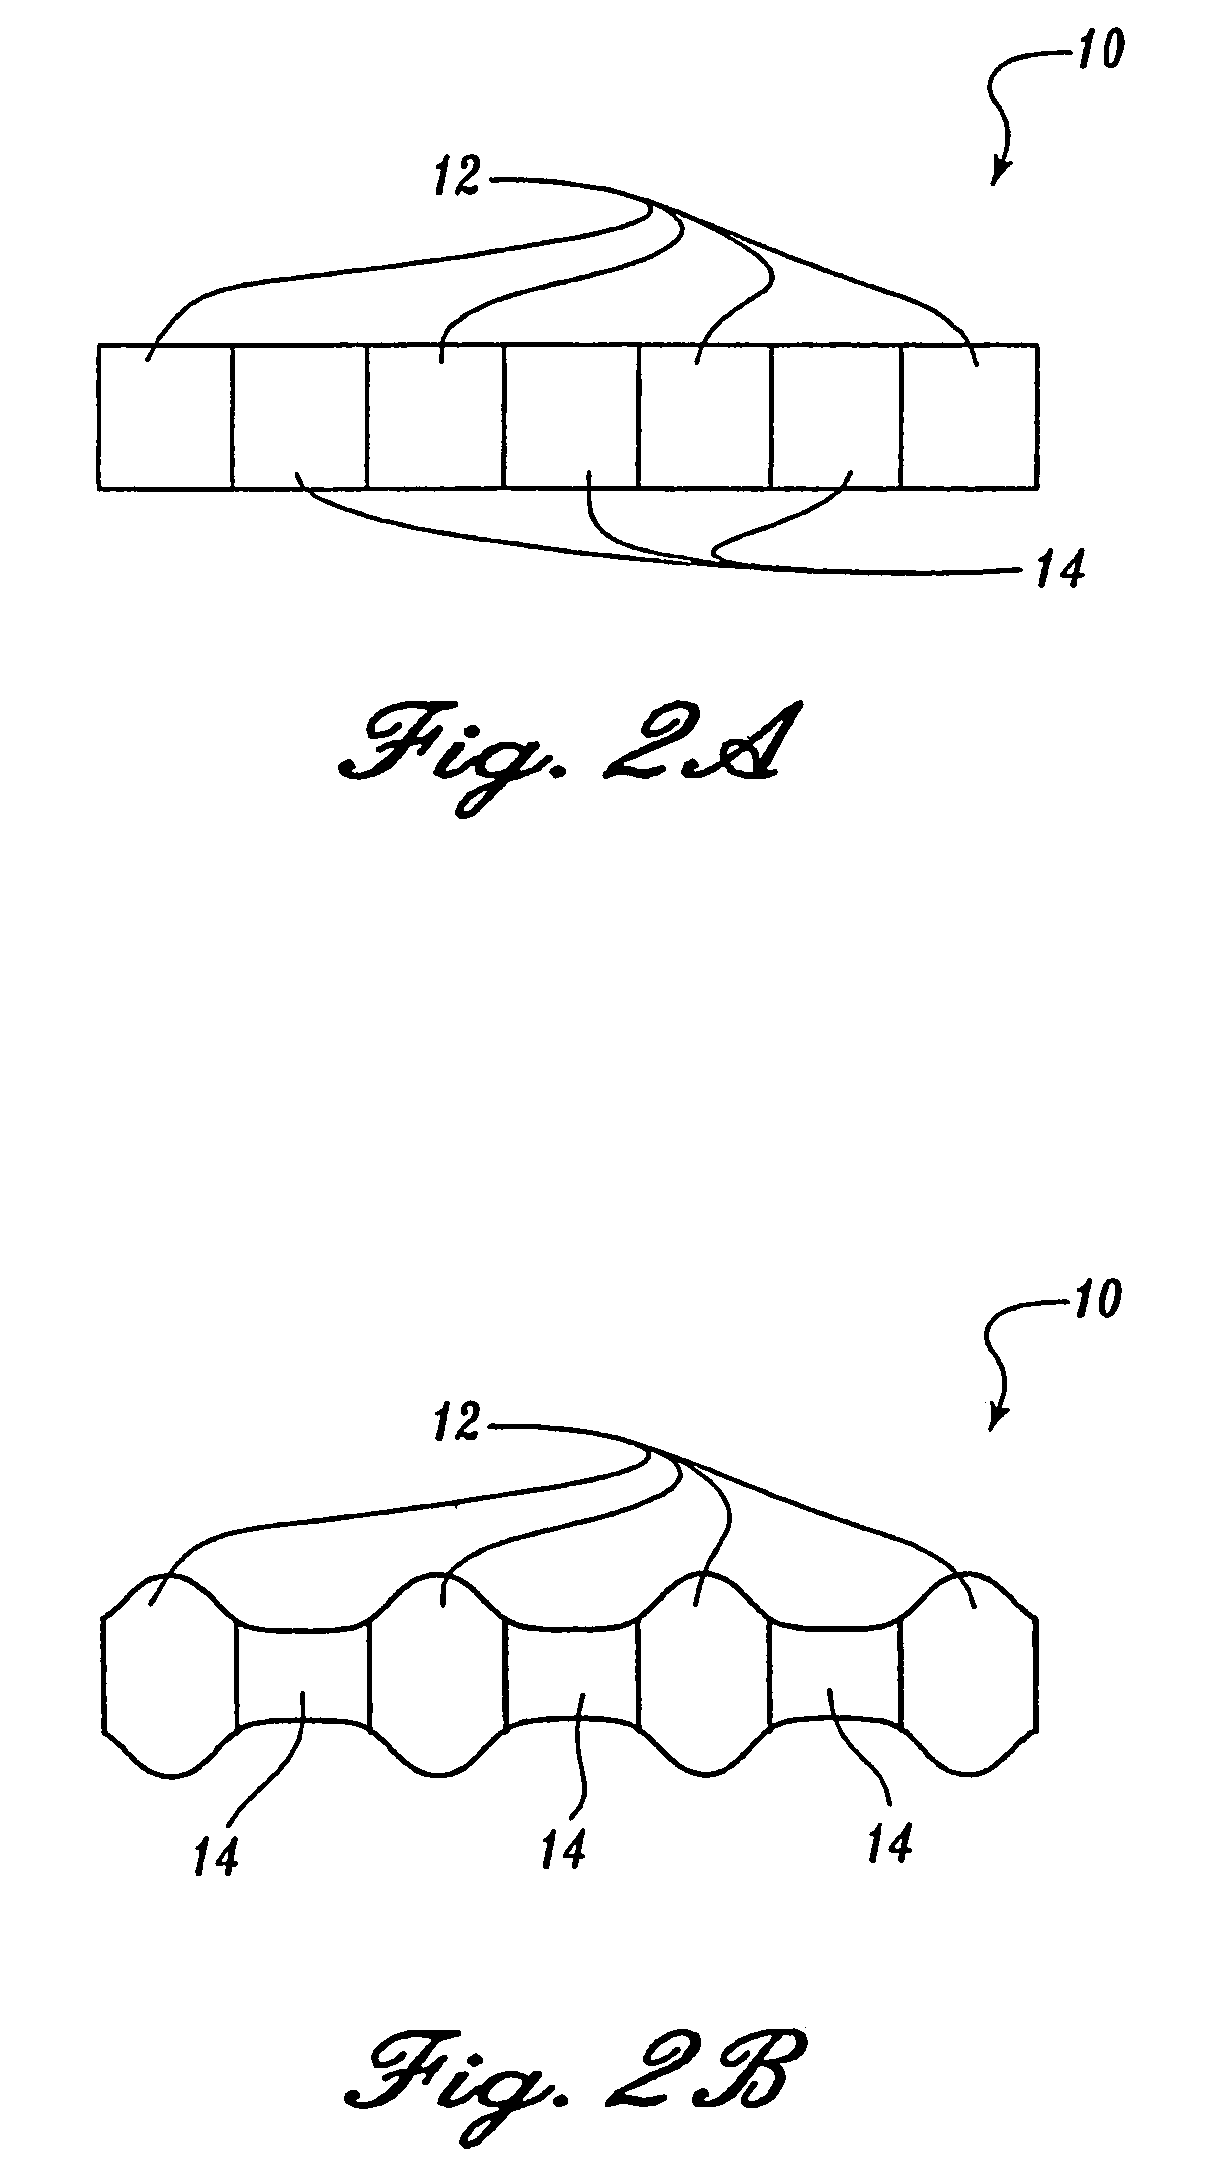 Methods for forming a fluted composite